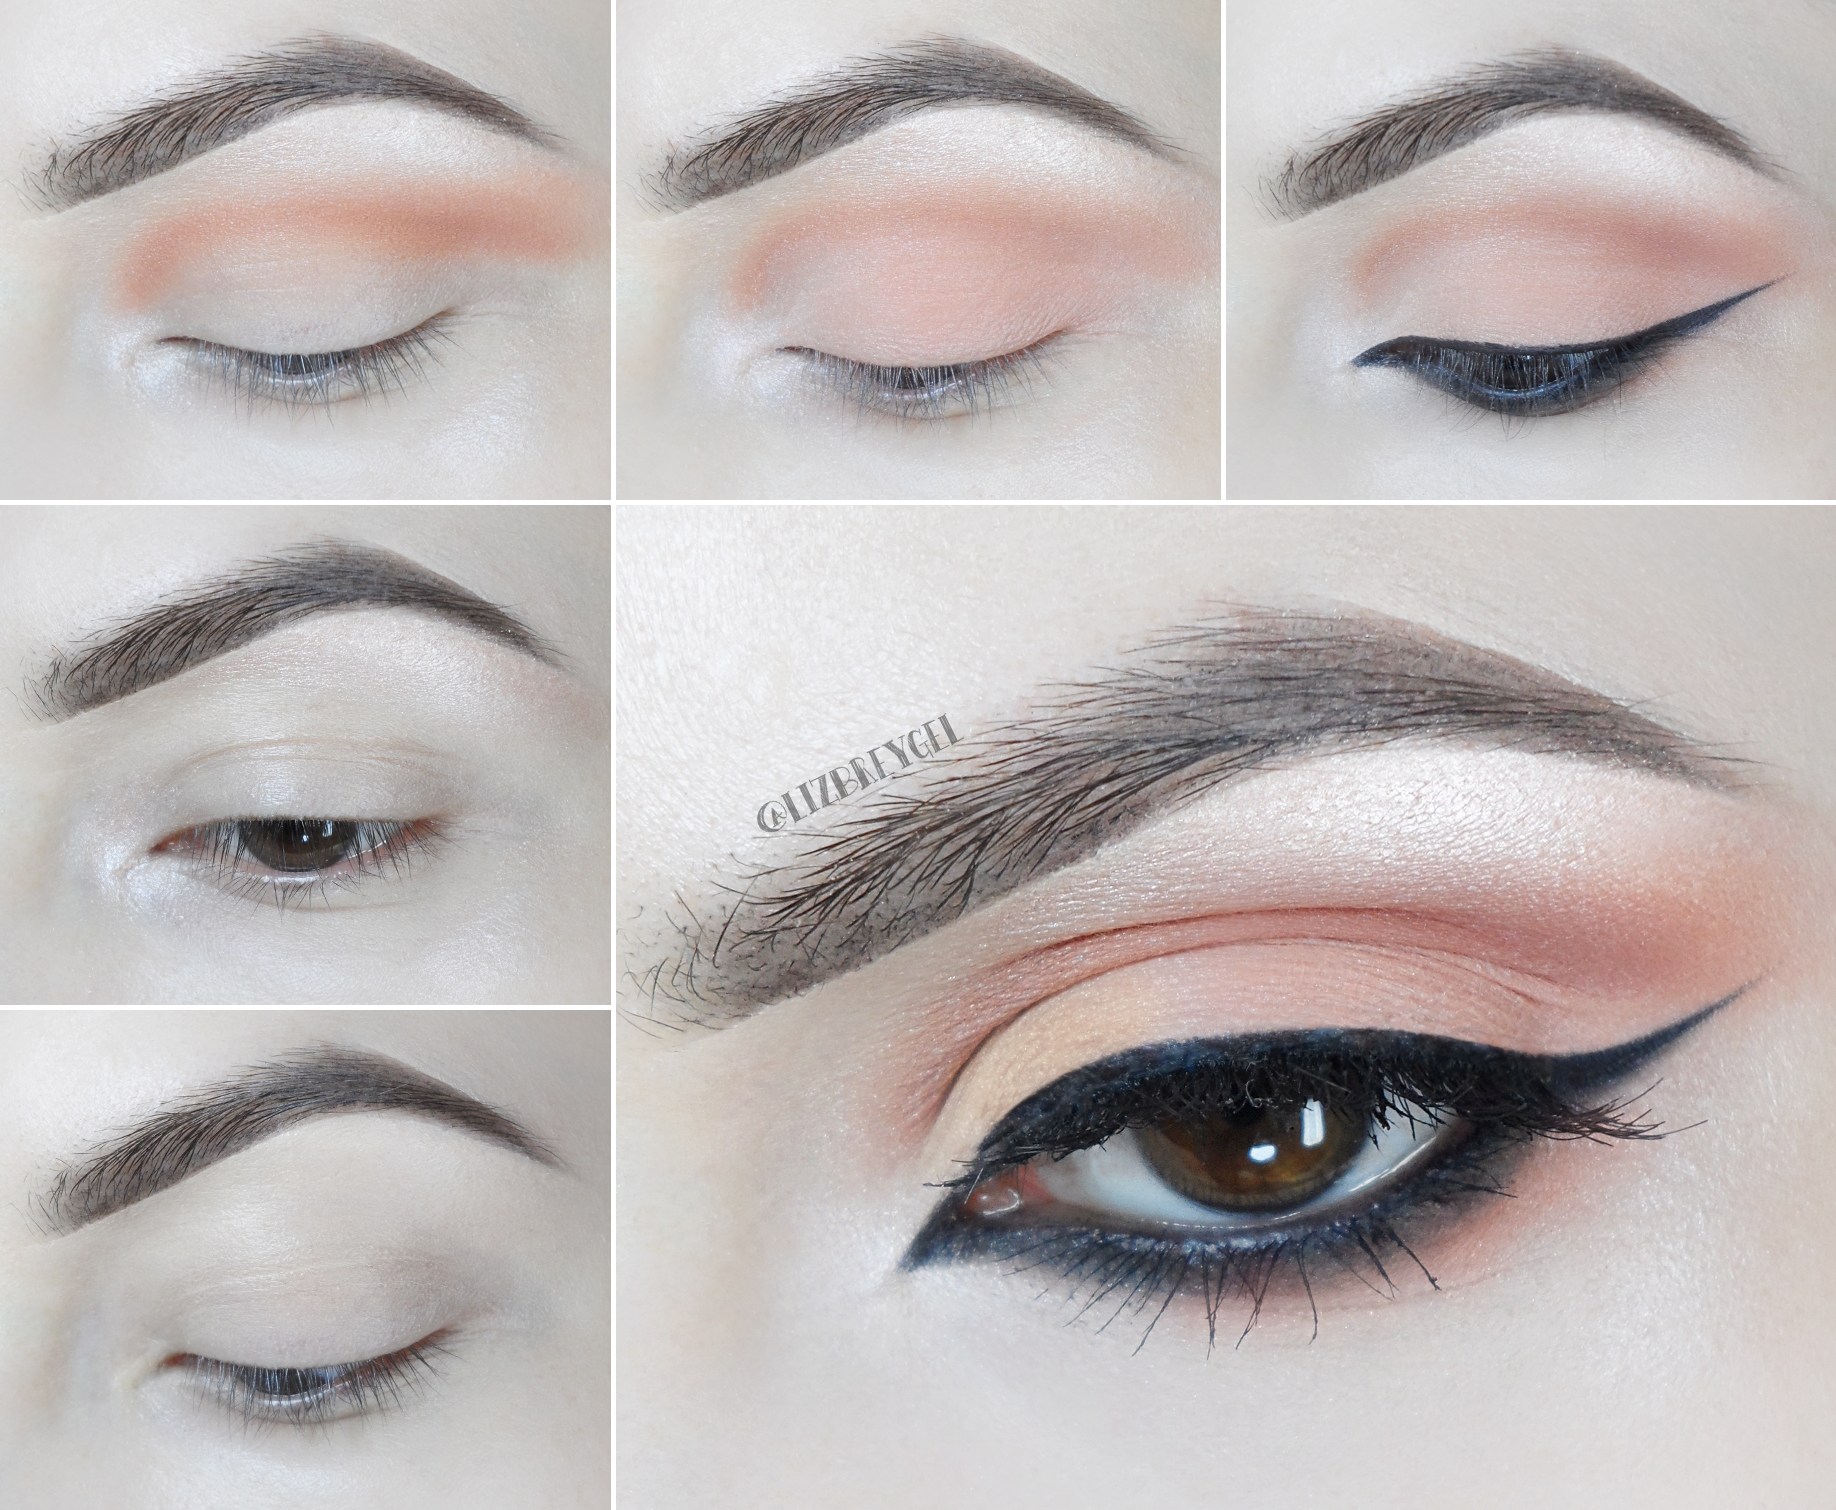 a simple step-by-step makeup pictorial with neutral ,everyday eye look